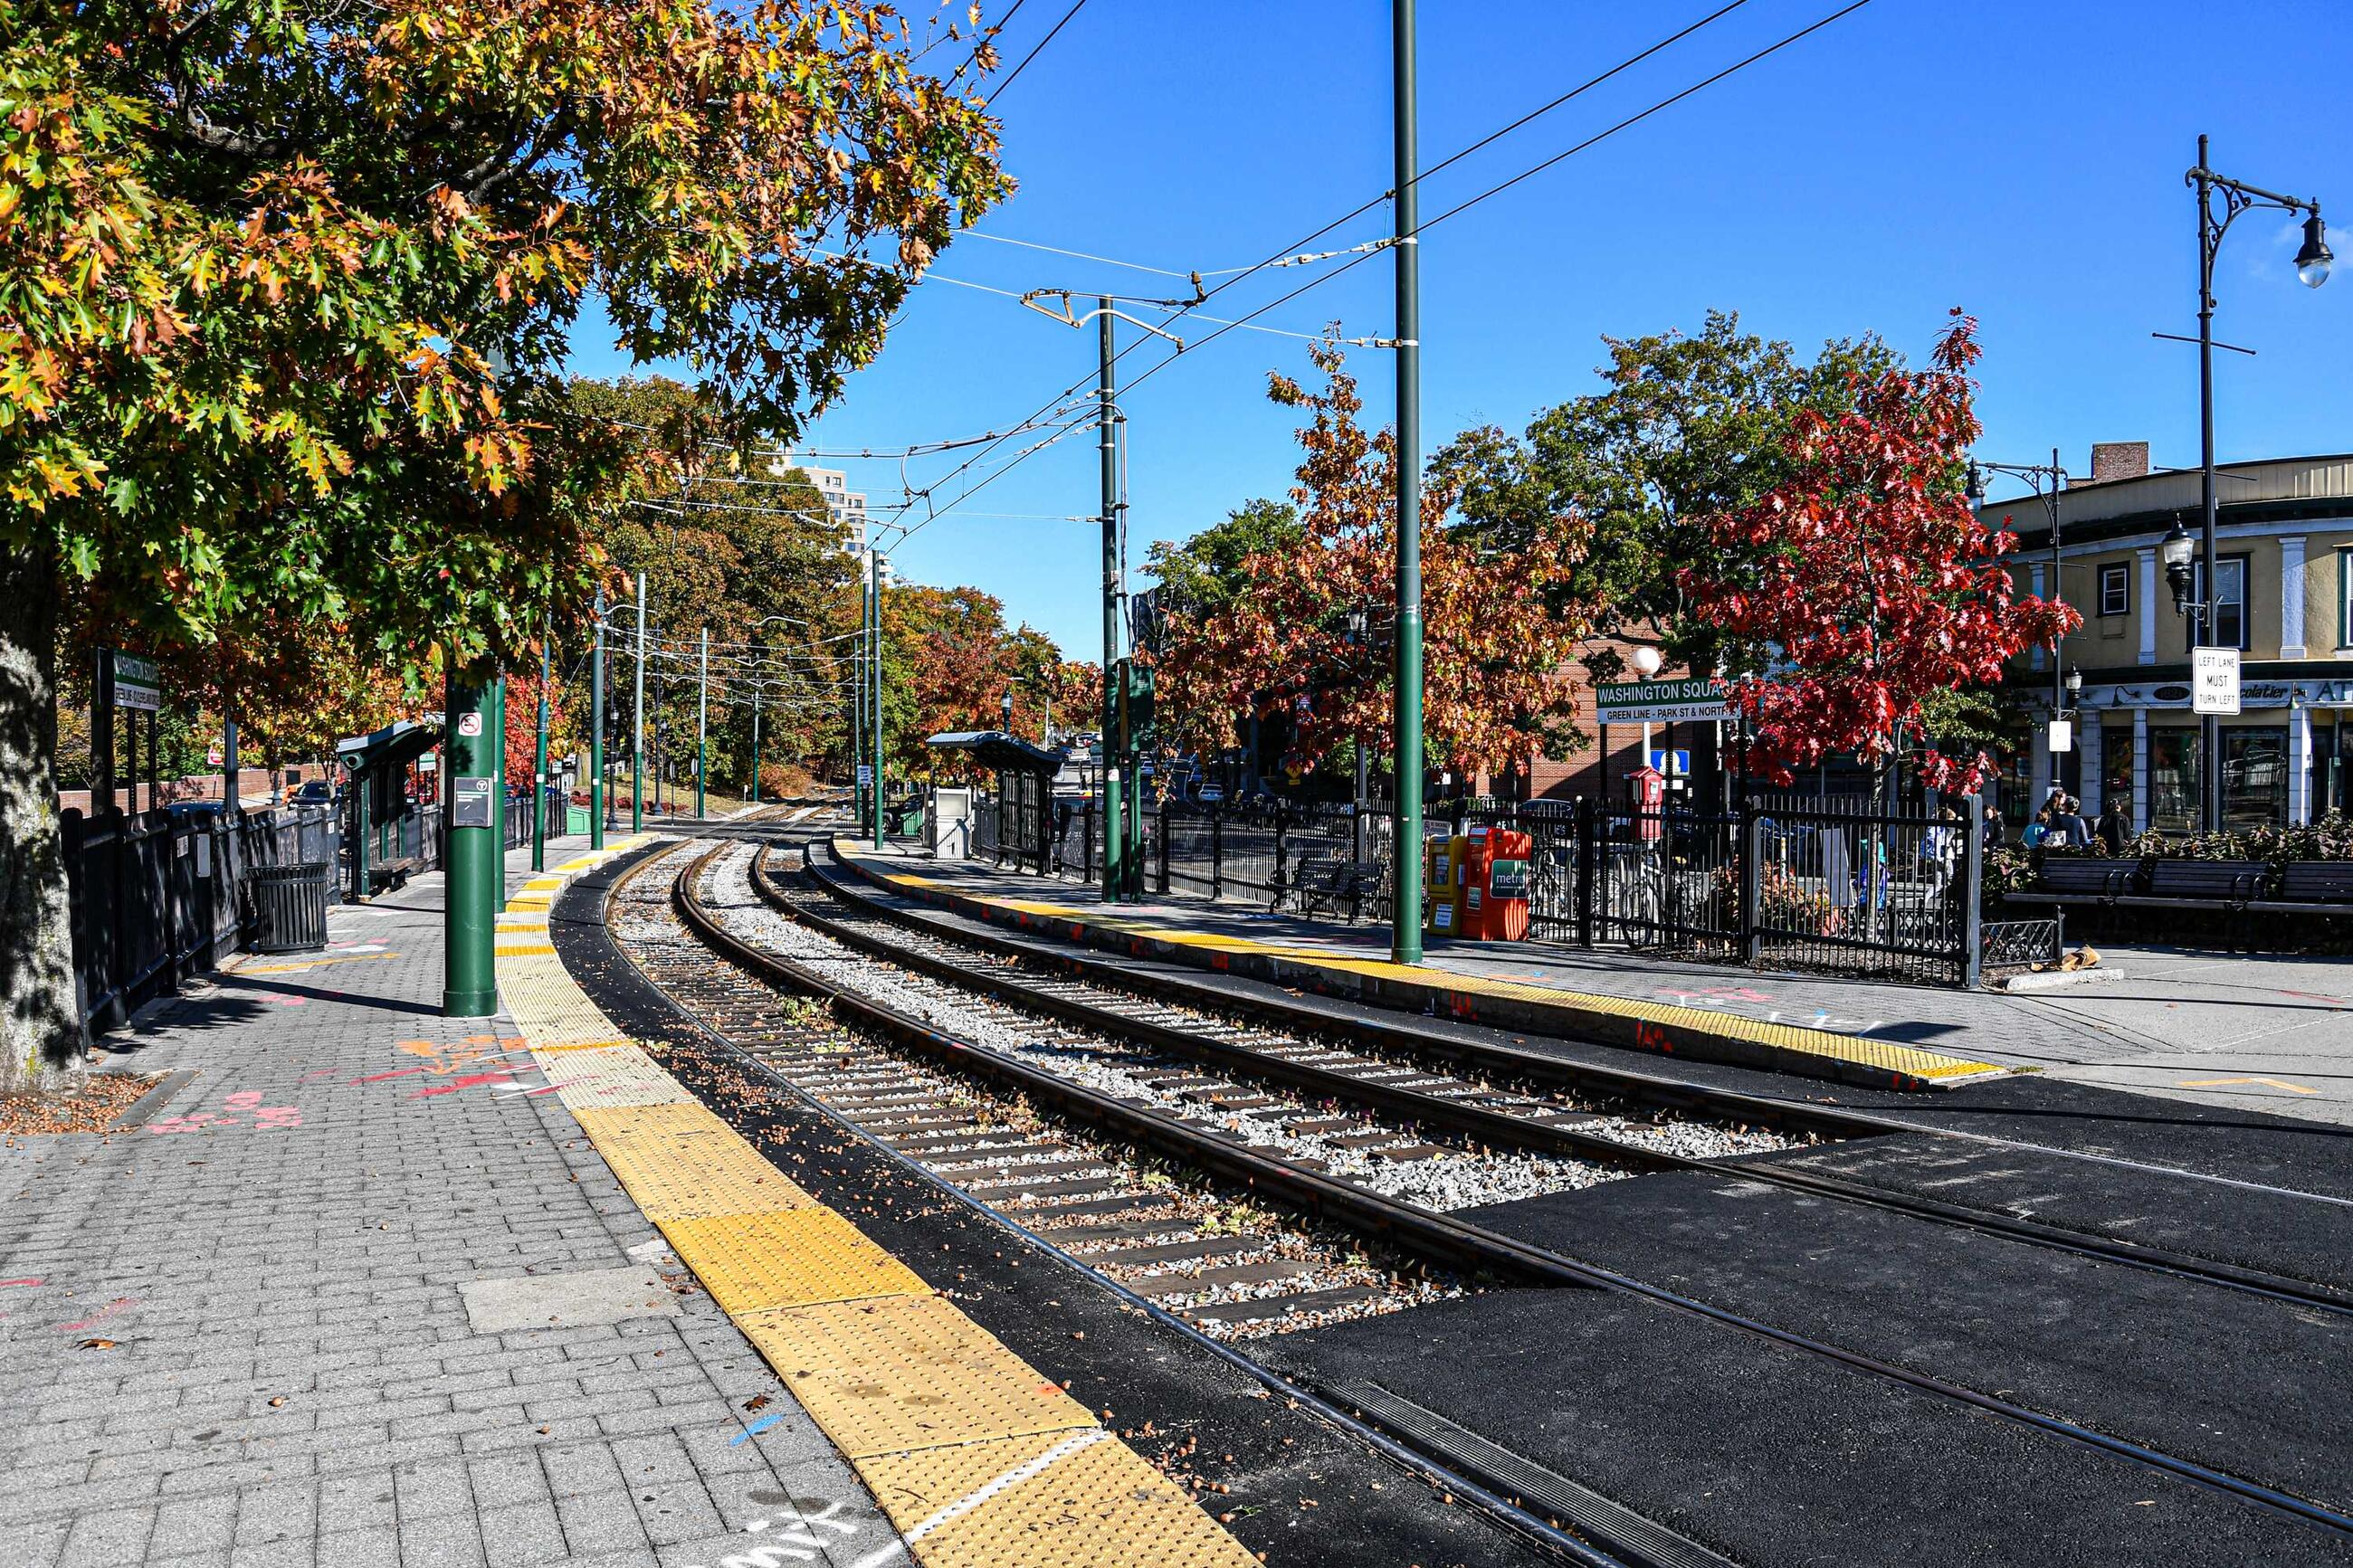 Green Line tracks at Washington Square station surrounded by foliage